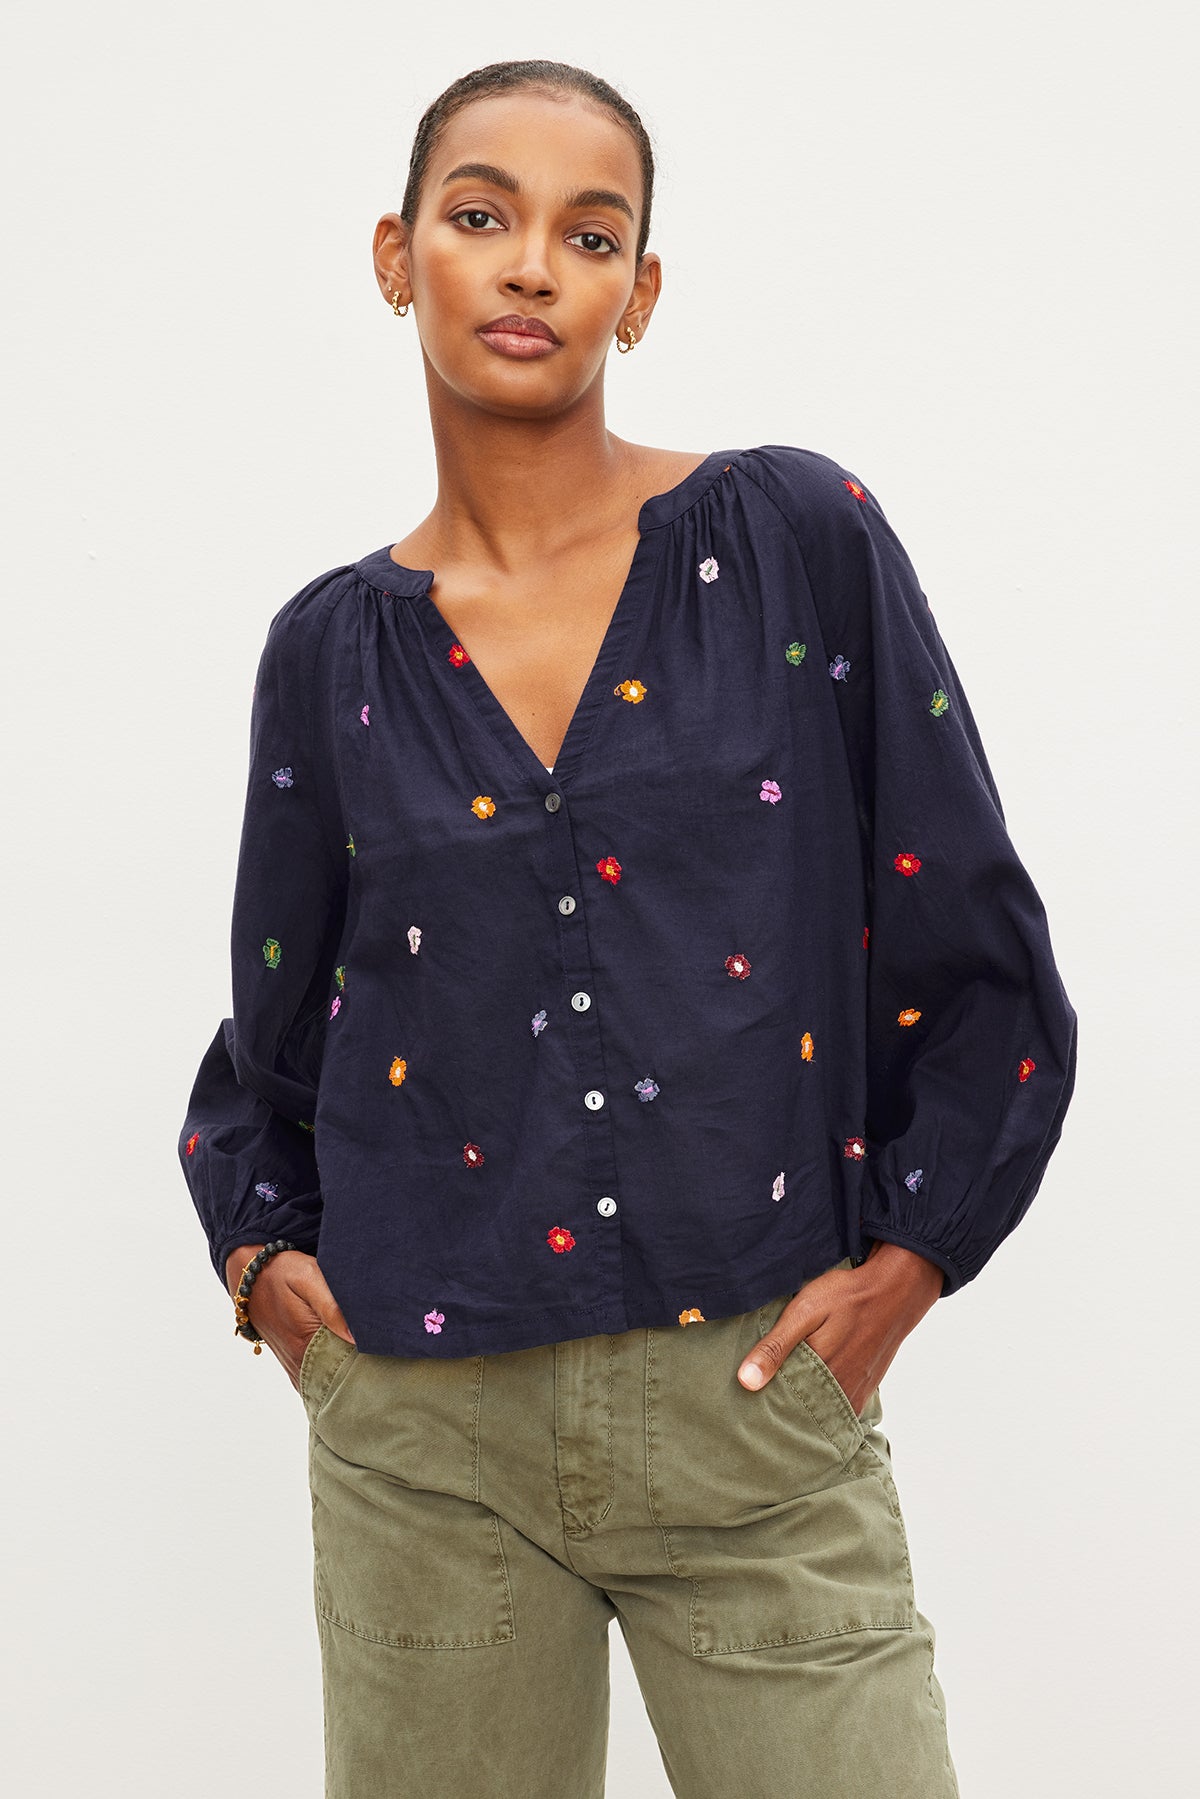 The model is wearing a Velvet by Graham & Spencer ARETHA EMBROIDERED BOHO TOP with multi - colored embroidered dots.-35955411419329